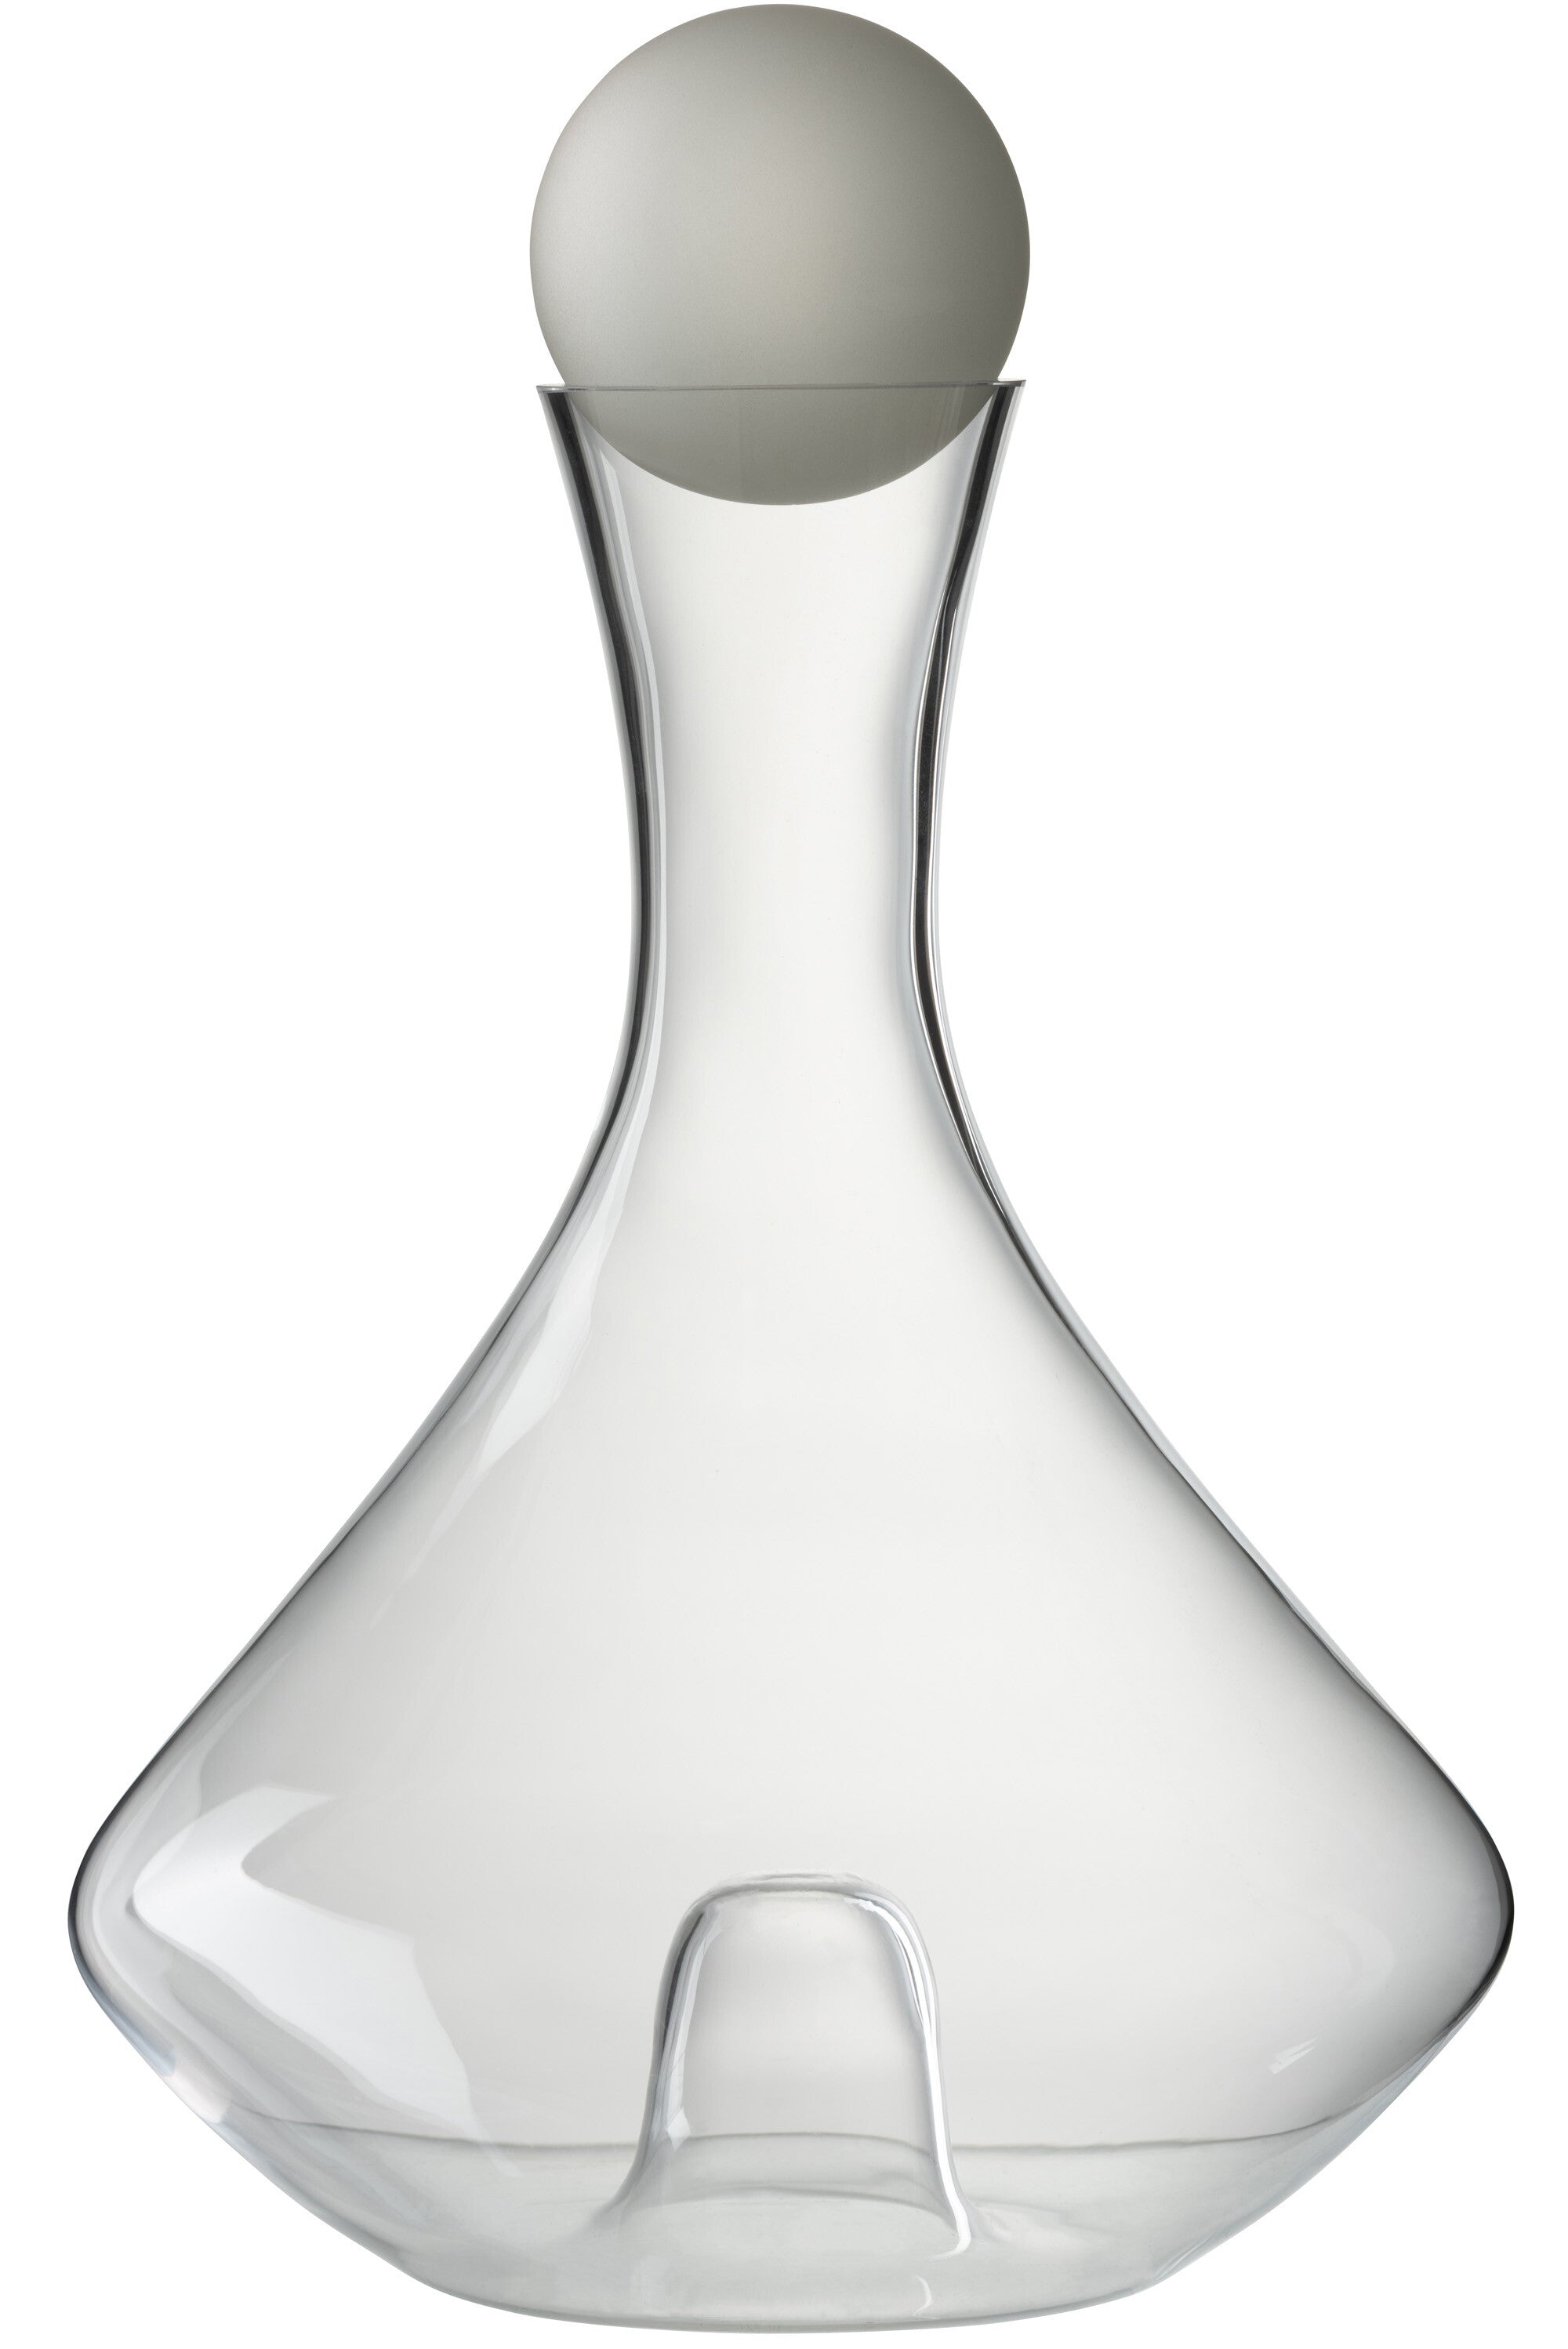 Fab Gifts | J-Line Modern Curved Glass Carafe by Weirs of Baggot Street